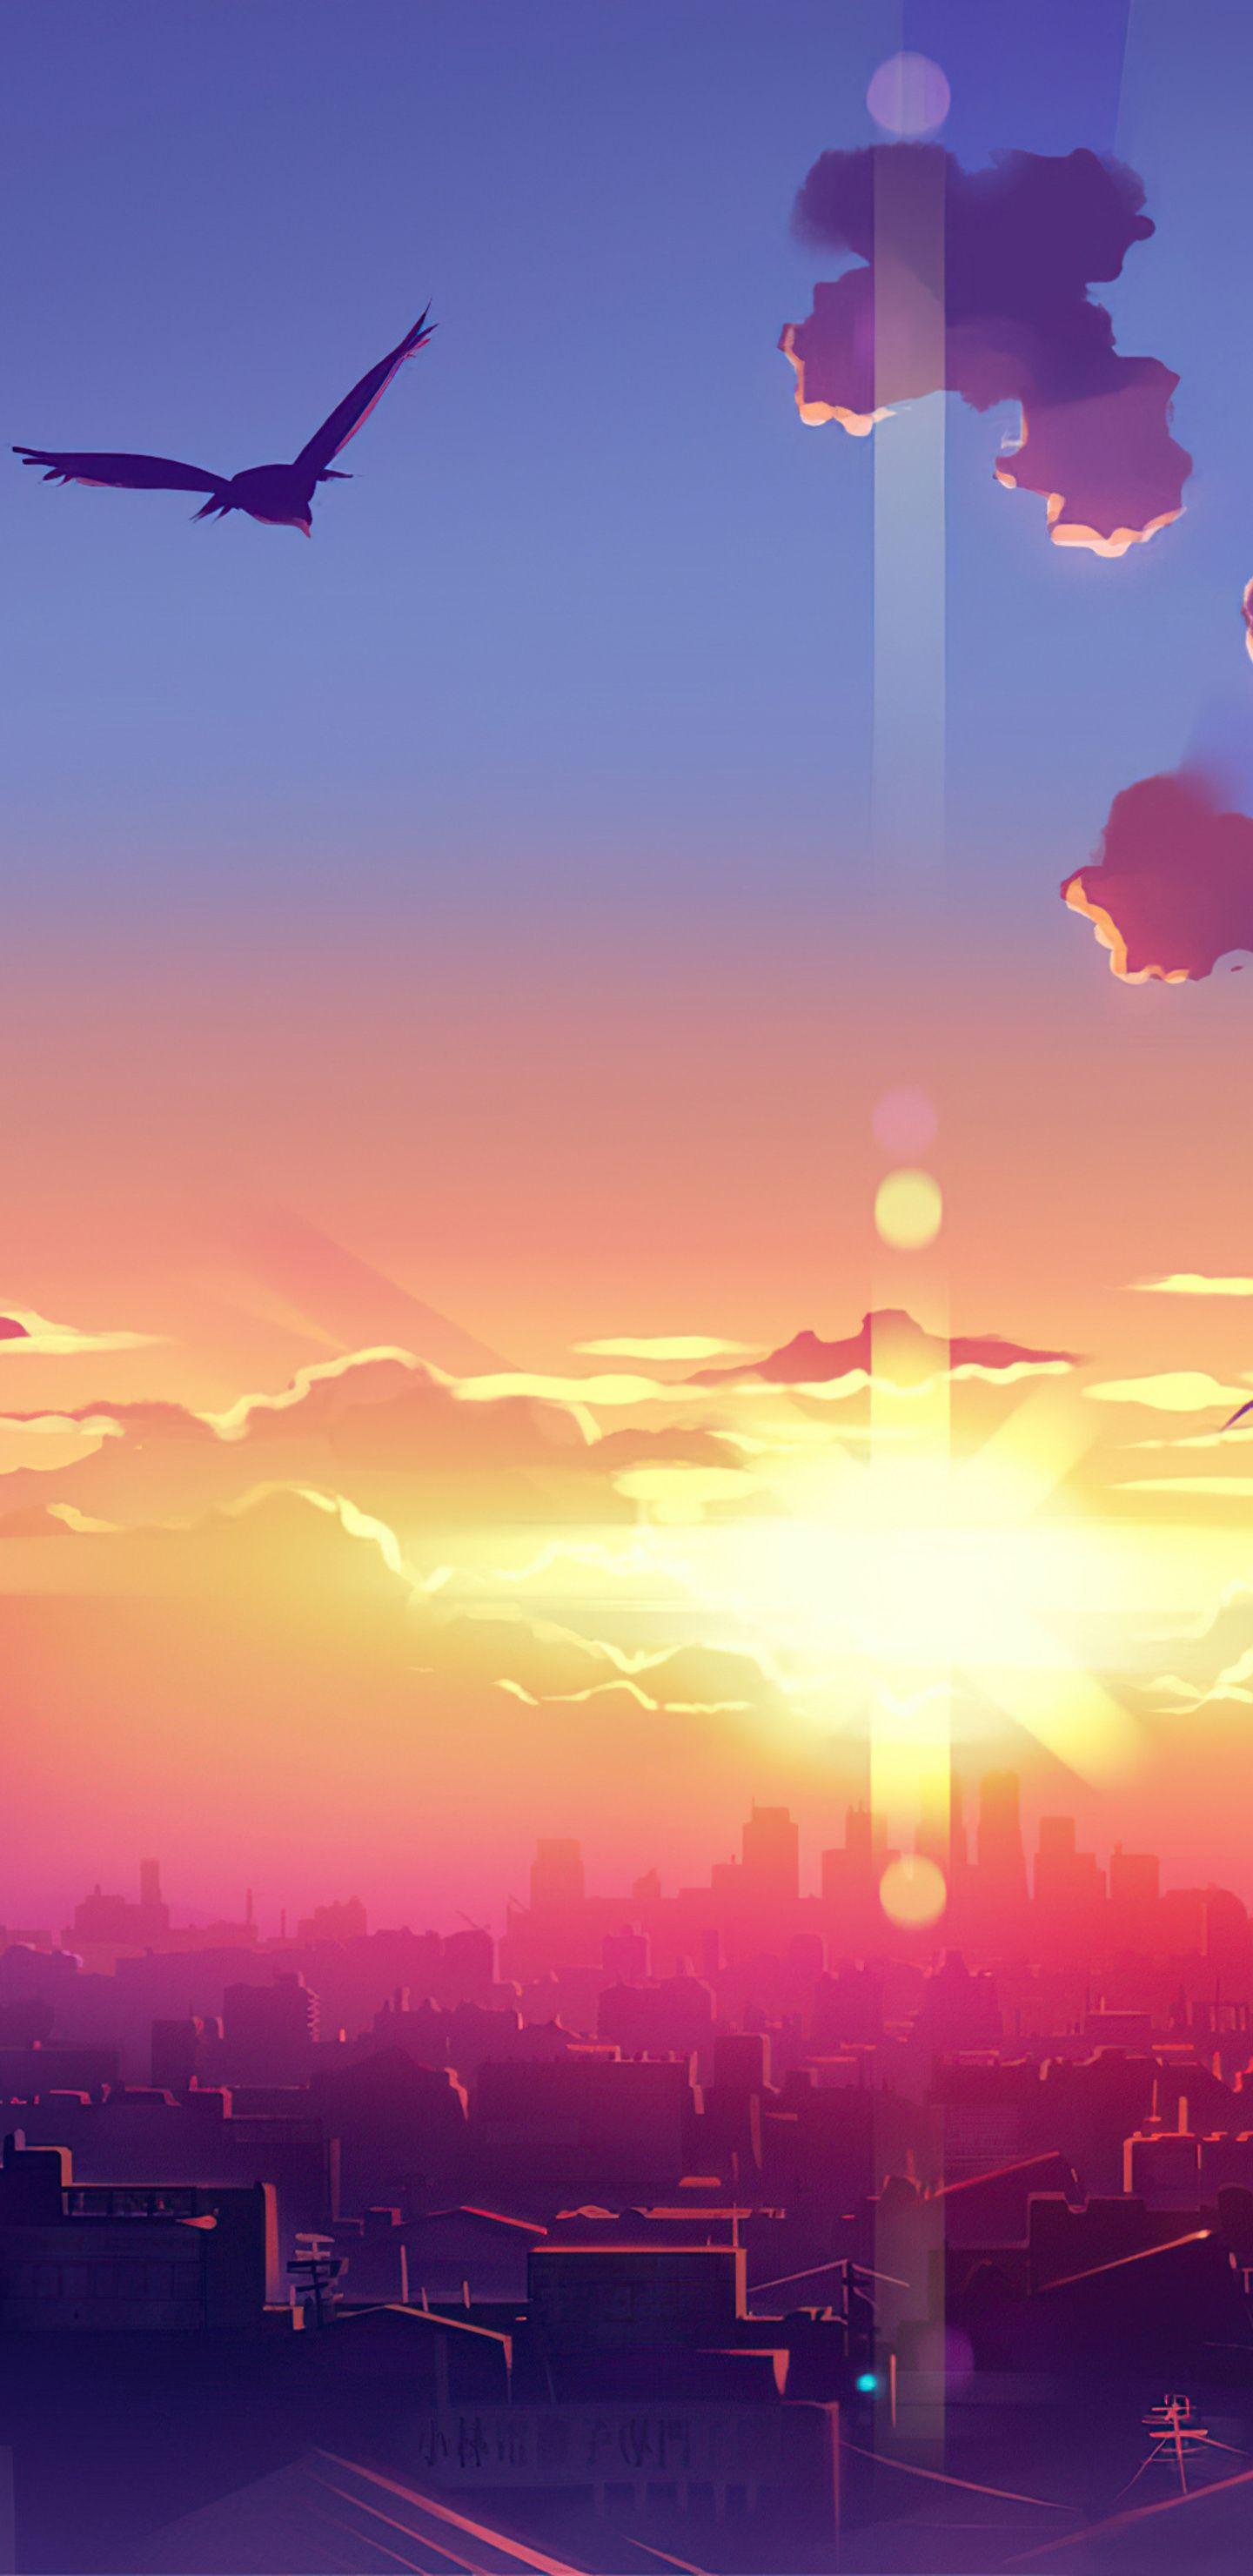 Sunset Anime Scenery Wallpapers - Top Free Sunset Anime Scenery